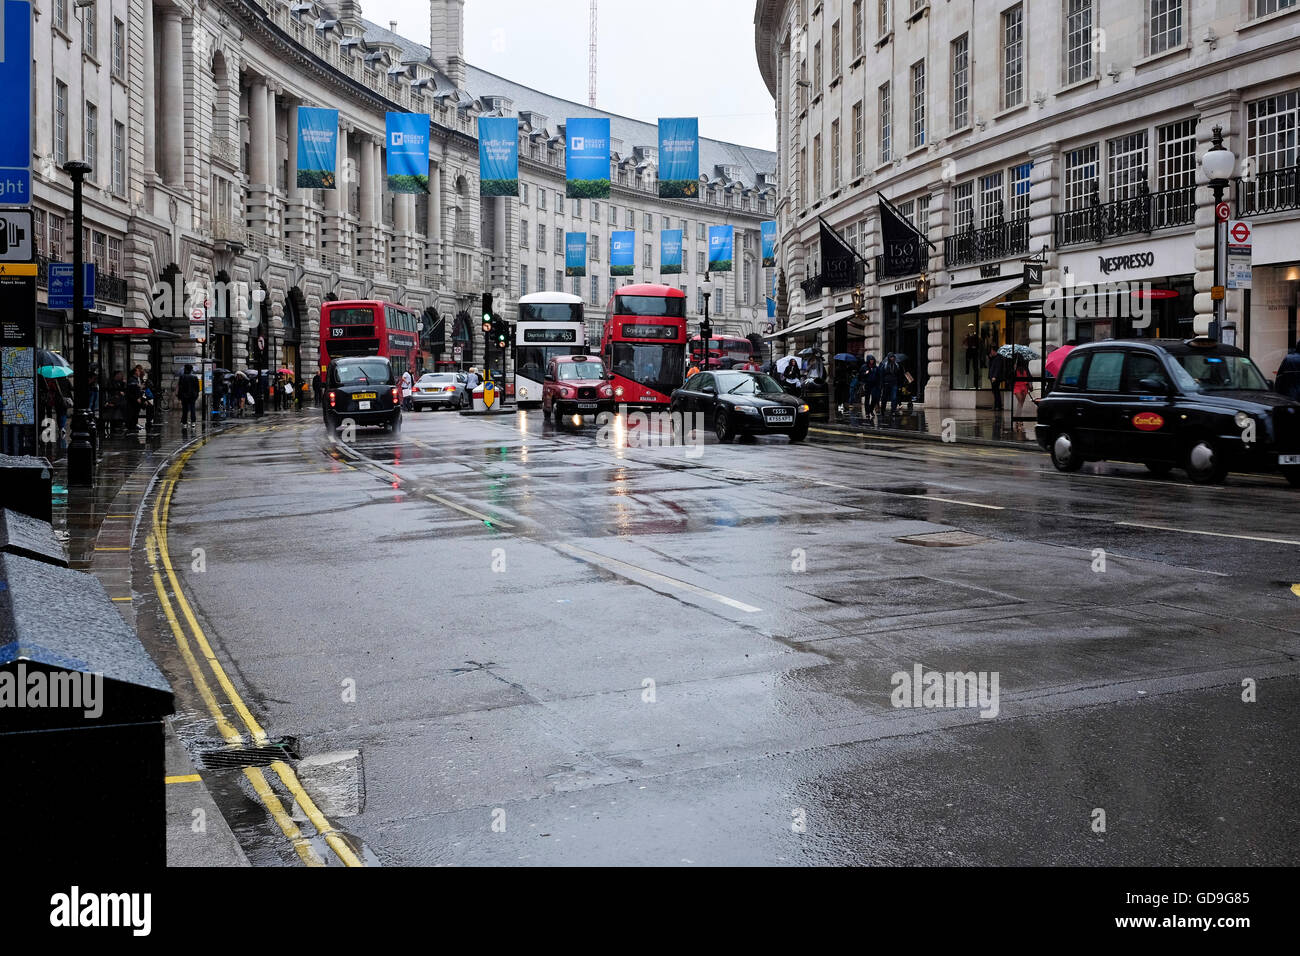 Piccadilly Circus London. London red buses on a road leading into Piccadilly Circus on a rainy day Stock Photo